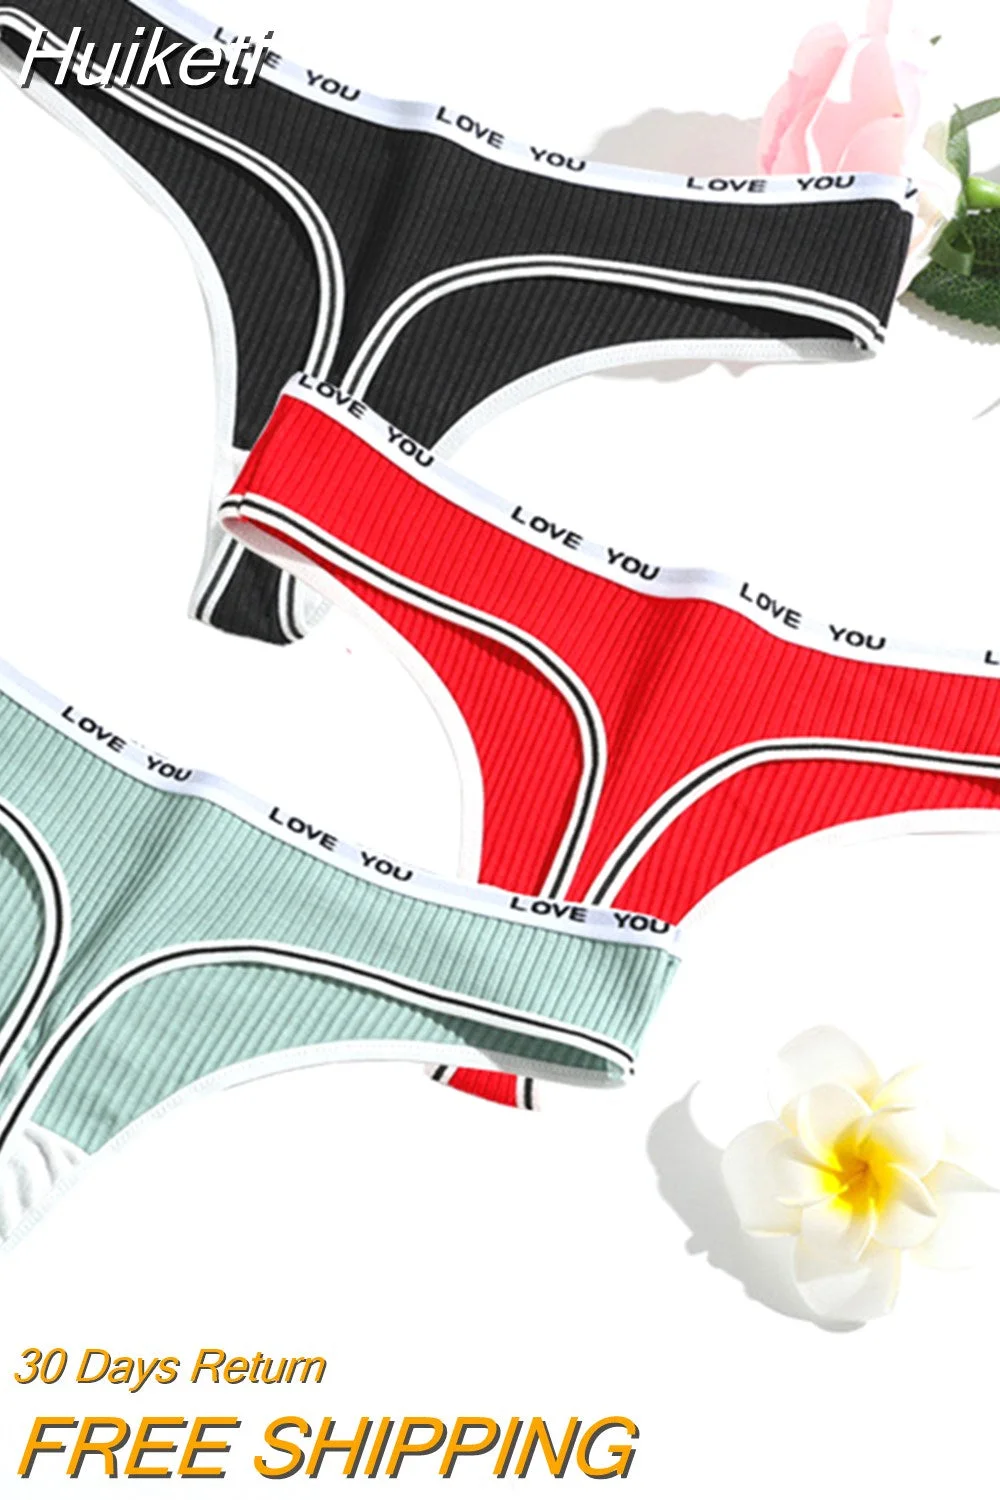 Huiketi Women Cotton Thong Ladies Letter G-String Low-Rise Panties Thread Briefs Female Underwear Sexy Pants Intimate Lingerie